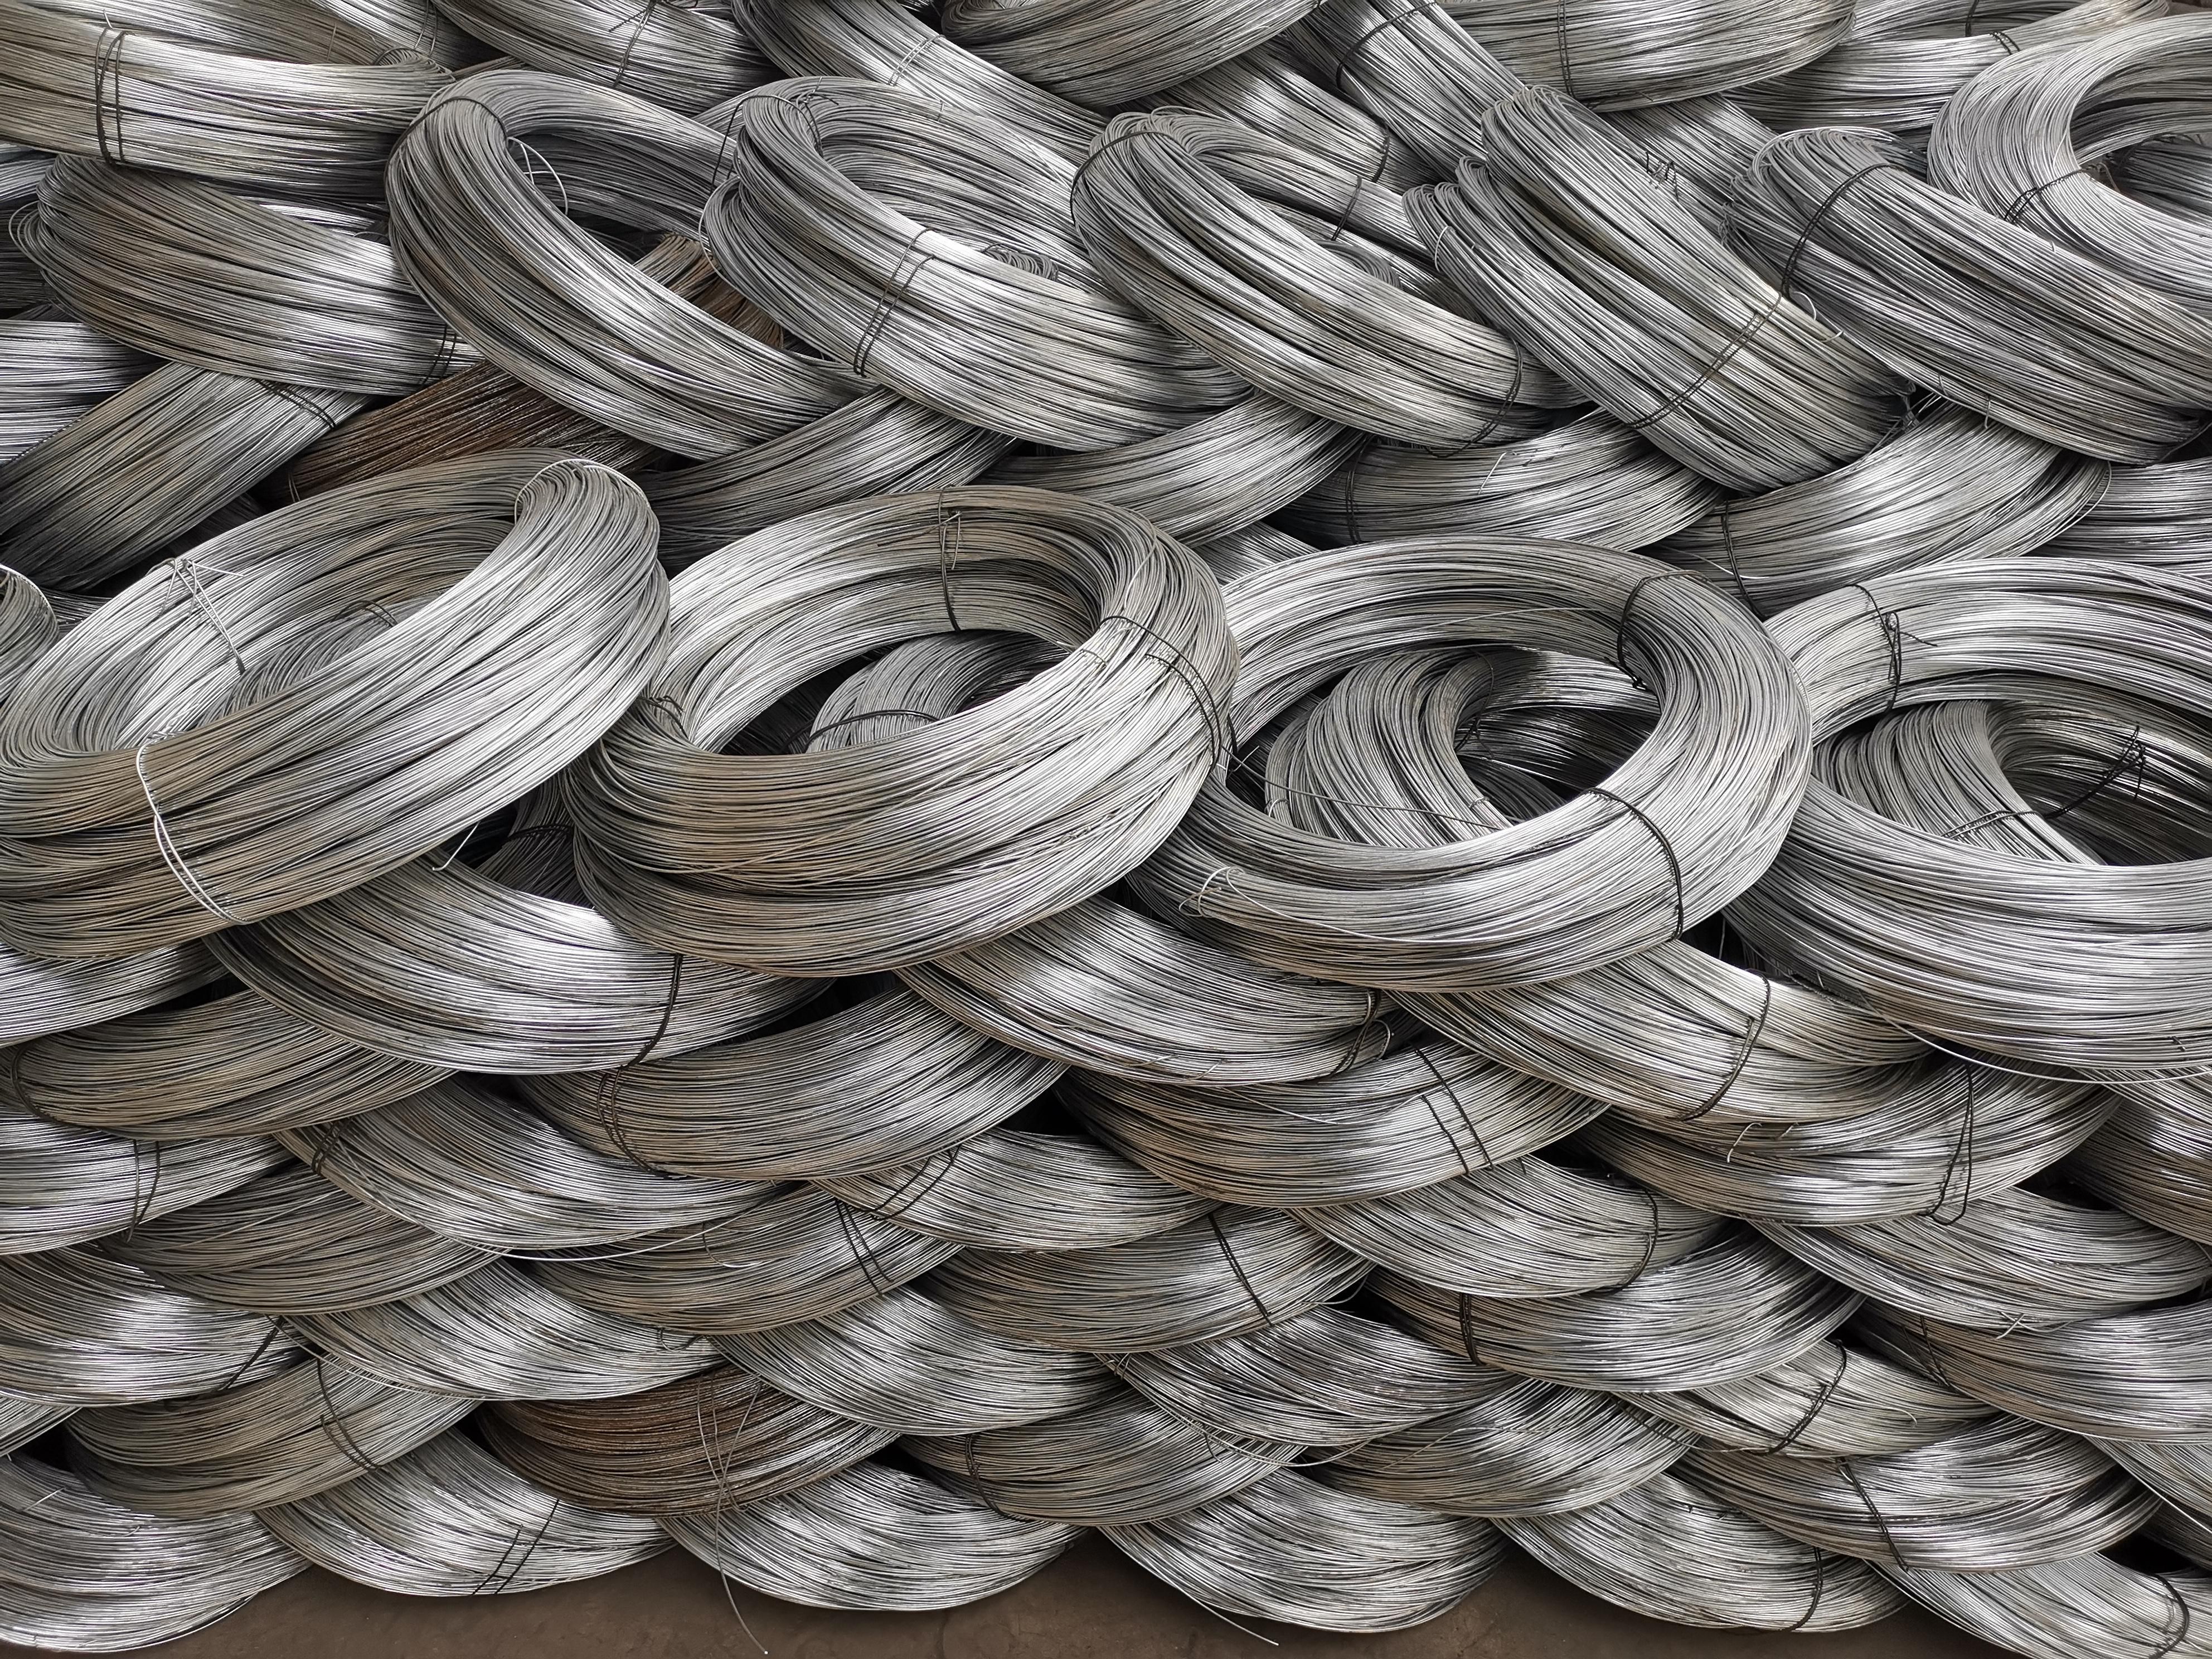 Looking to Buy Galvanized Steel Wire. Here are 10 Things to Know Before You Buy